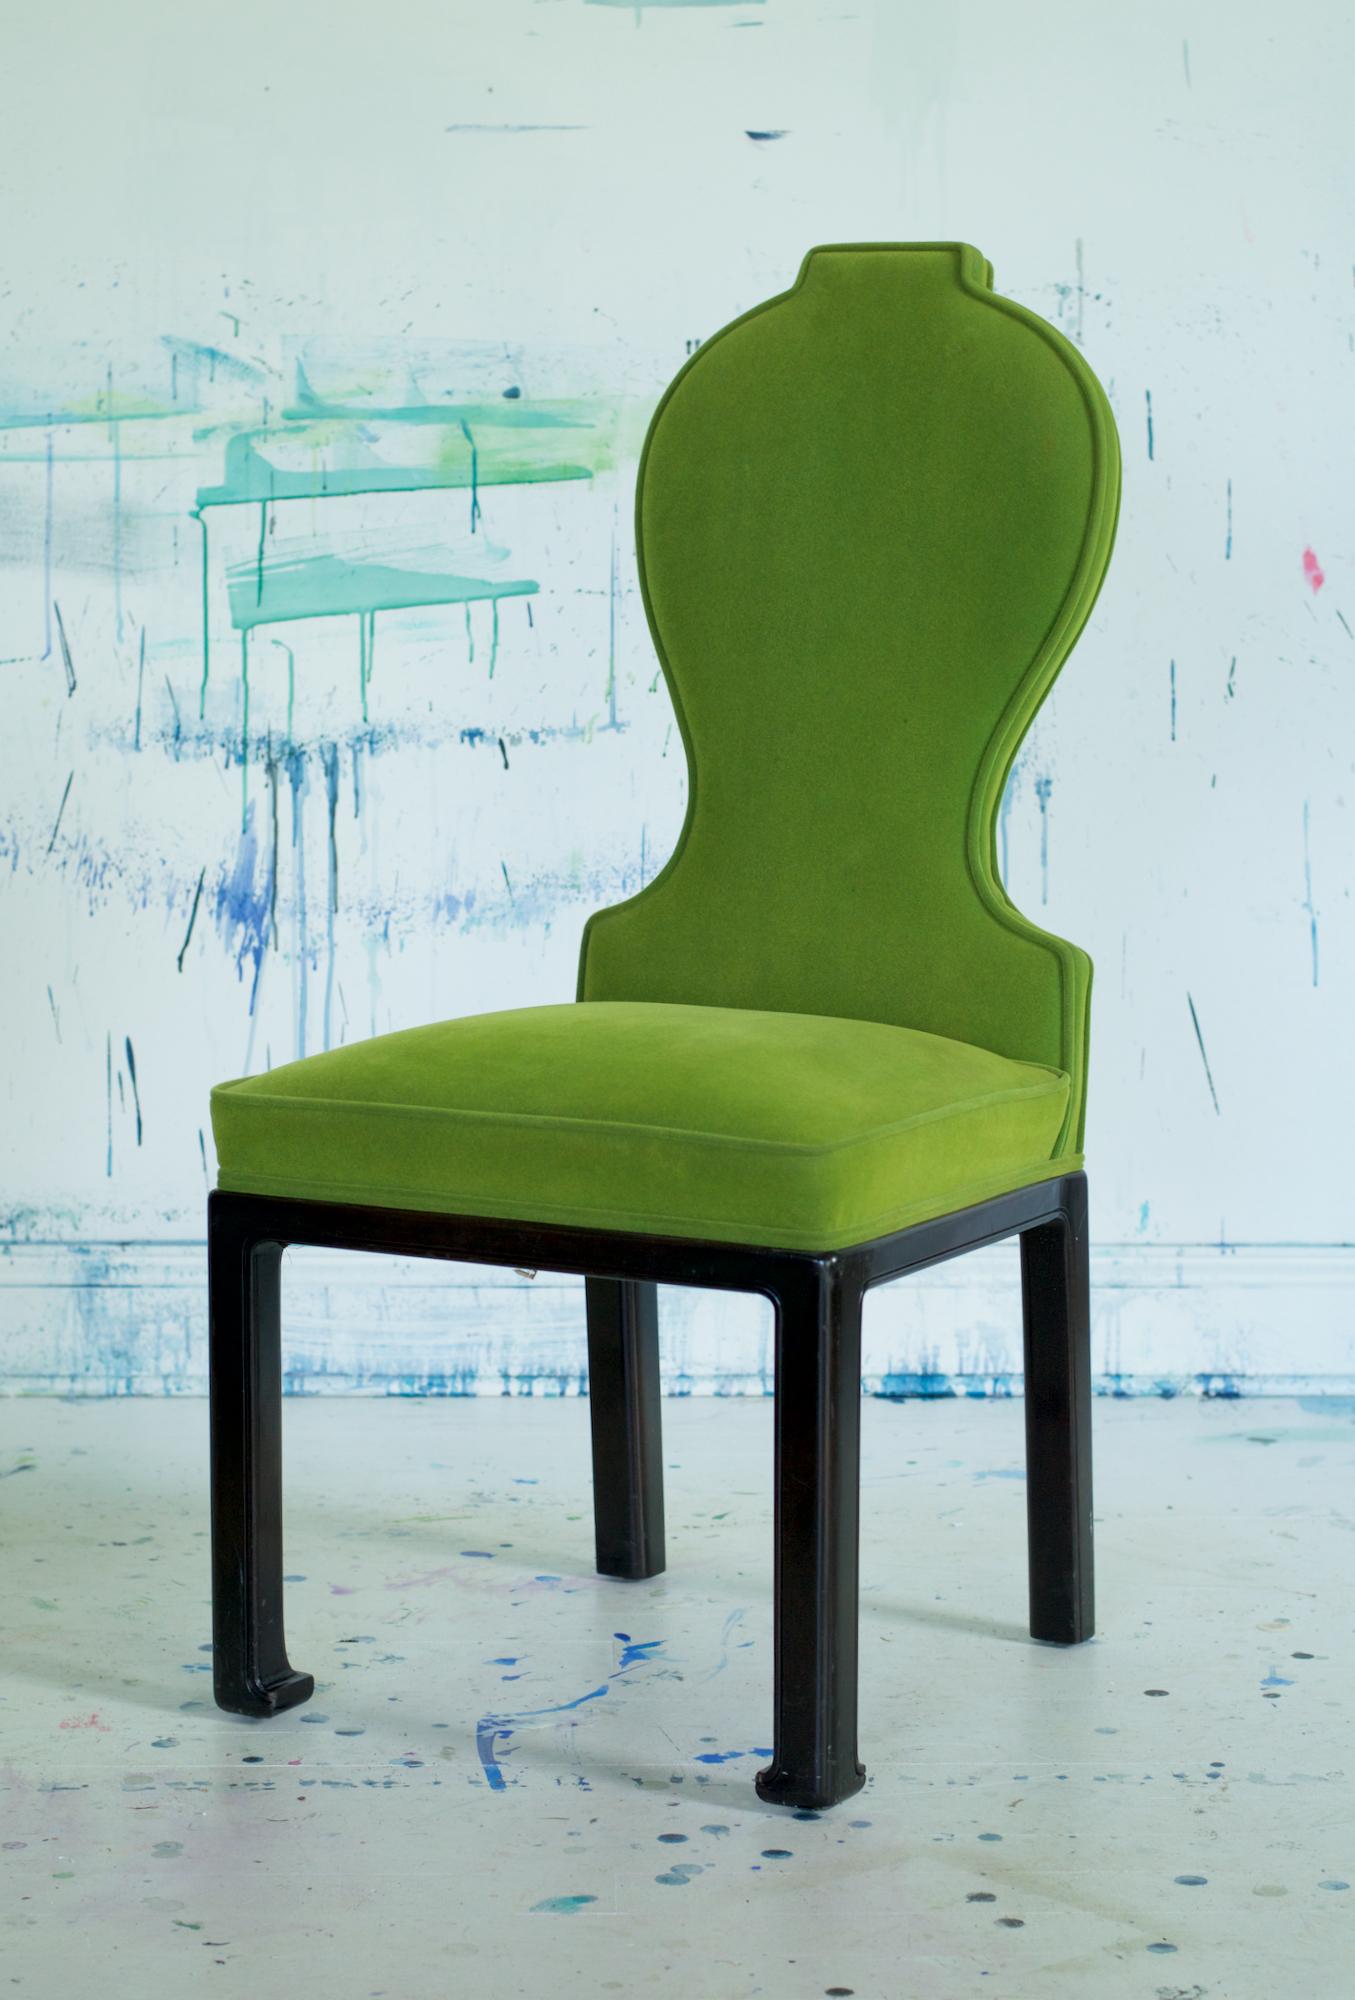 A set of elegant and chic dining chairs having modernist spoon backs and simple ming inspired leg conformation. The late 1970s vintage chairs are dressed in an incredibly vibrant rich green contract grade short pile mohair which is most likely